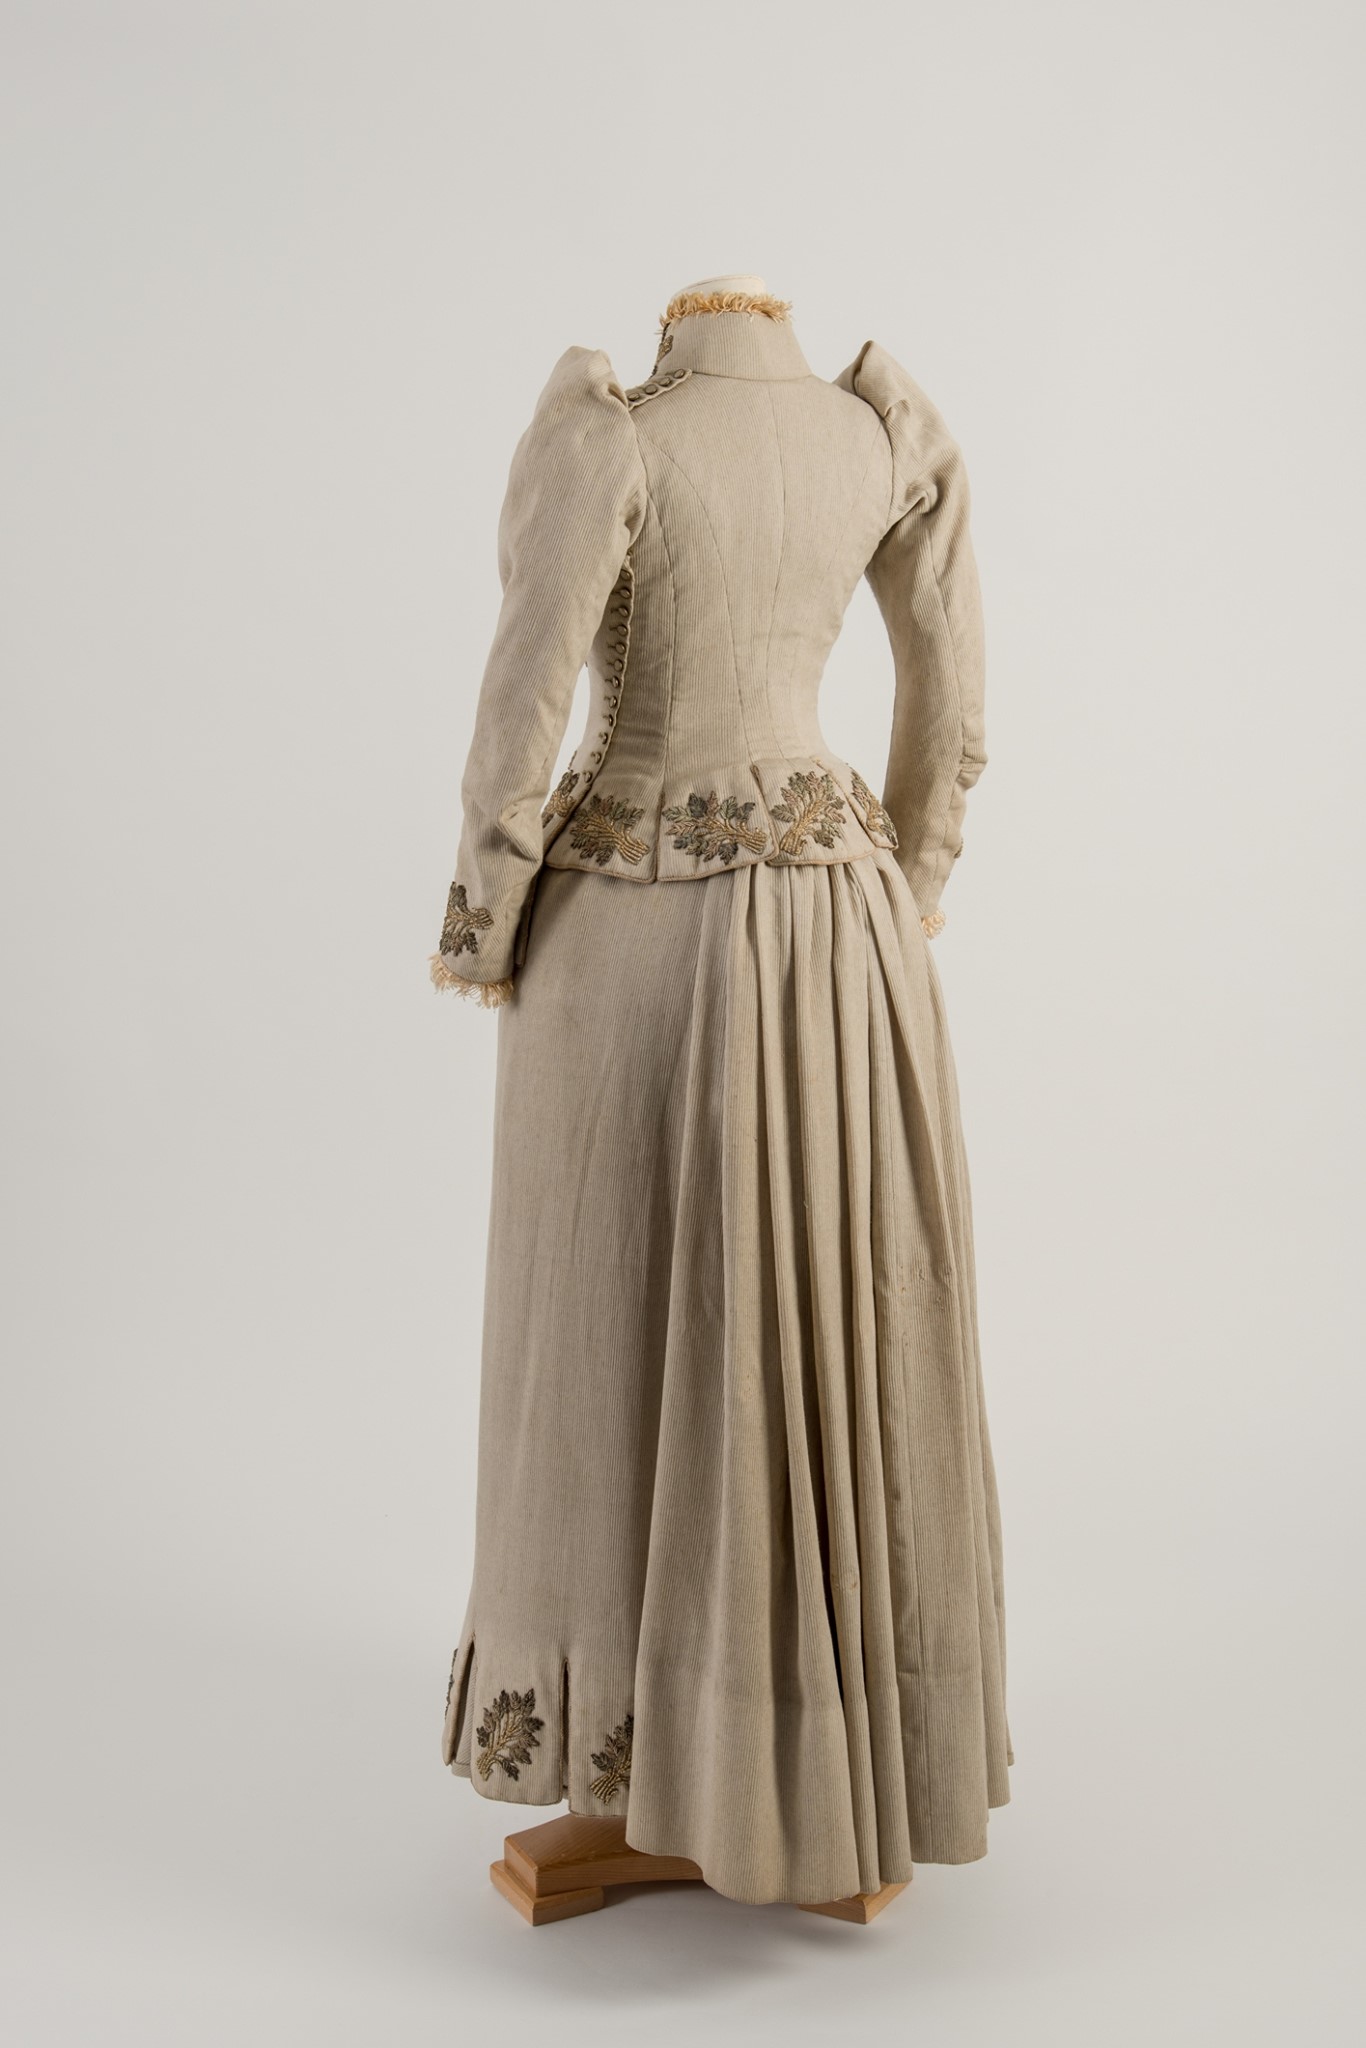 Walking dress, 1890-91, English, H J Griffin, Nottingham. Light grey corded wool with embroidered leaf motifs. Featured in Janet Arnold’s ‘Patterns of Fashion 2, Fashion Museum Bath